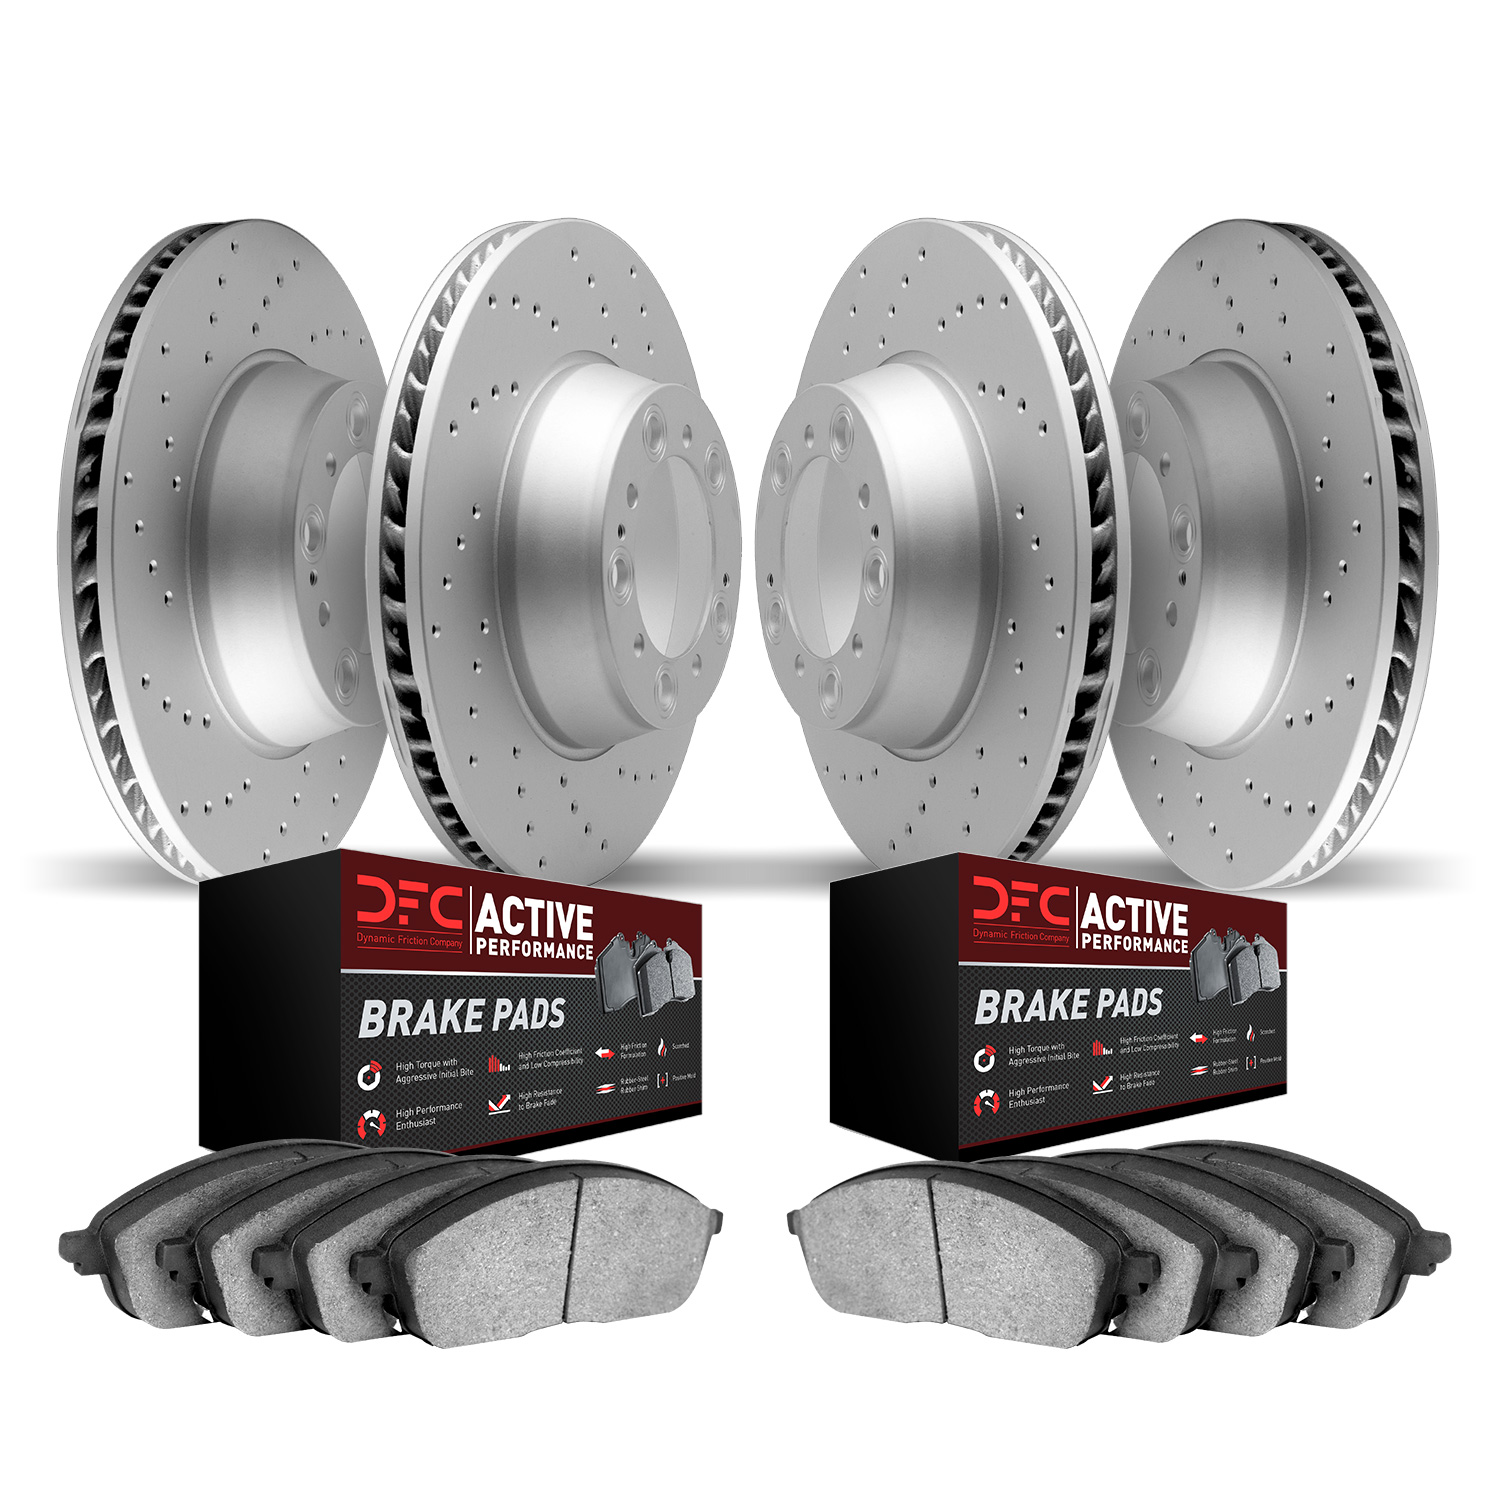 2704-67042 Geoperformance Drilled Brake Rotors with Active Performance Pads Kit, 2008-2015 Infiniti/Nissan, Position: Front and